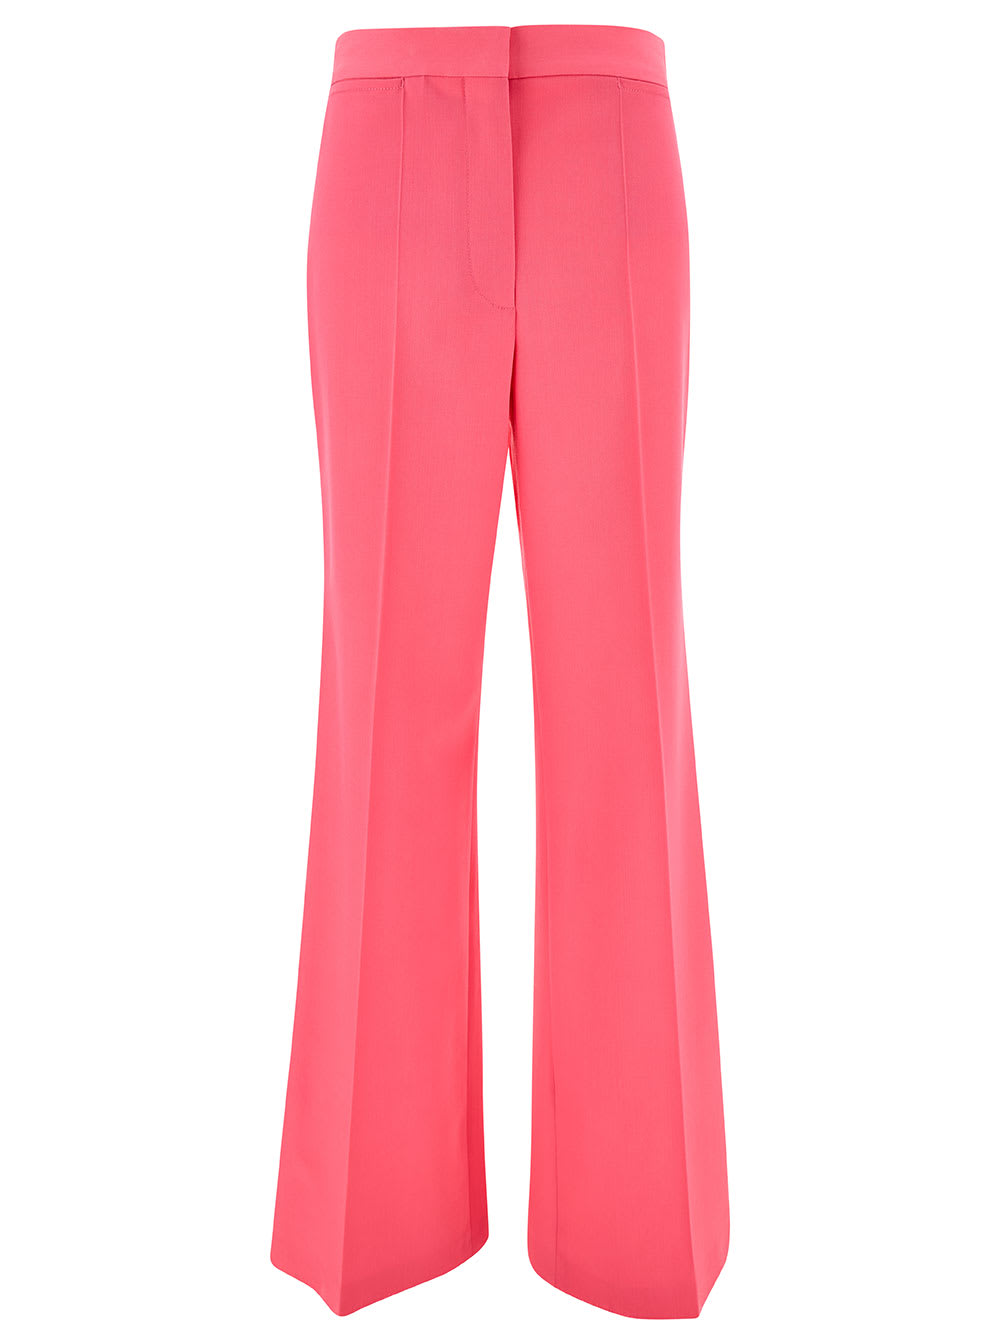 STELLA MCCARTNEY ICONIC SALMON PINK TAILORED FLARED PANTS IN STRETCH WOOL WOMAN